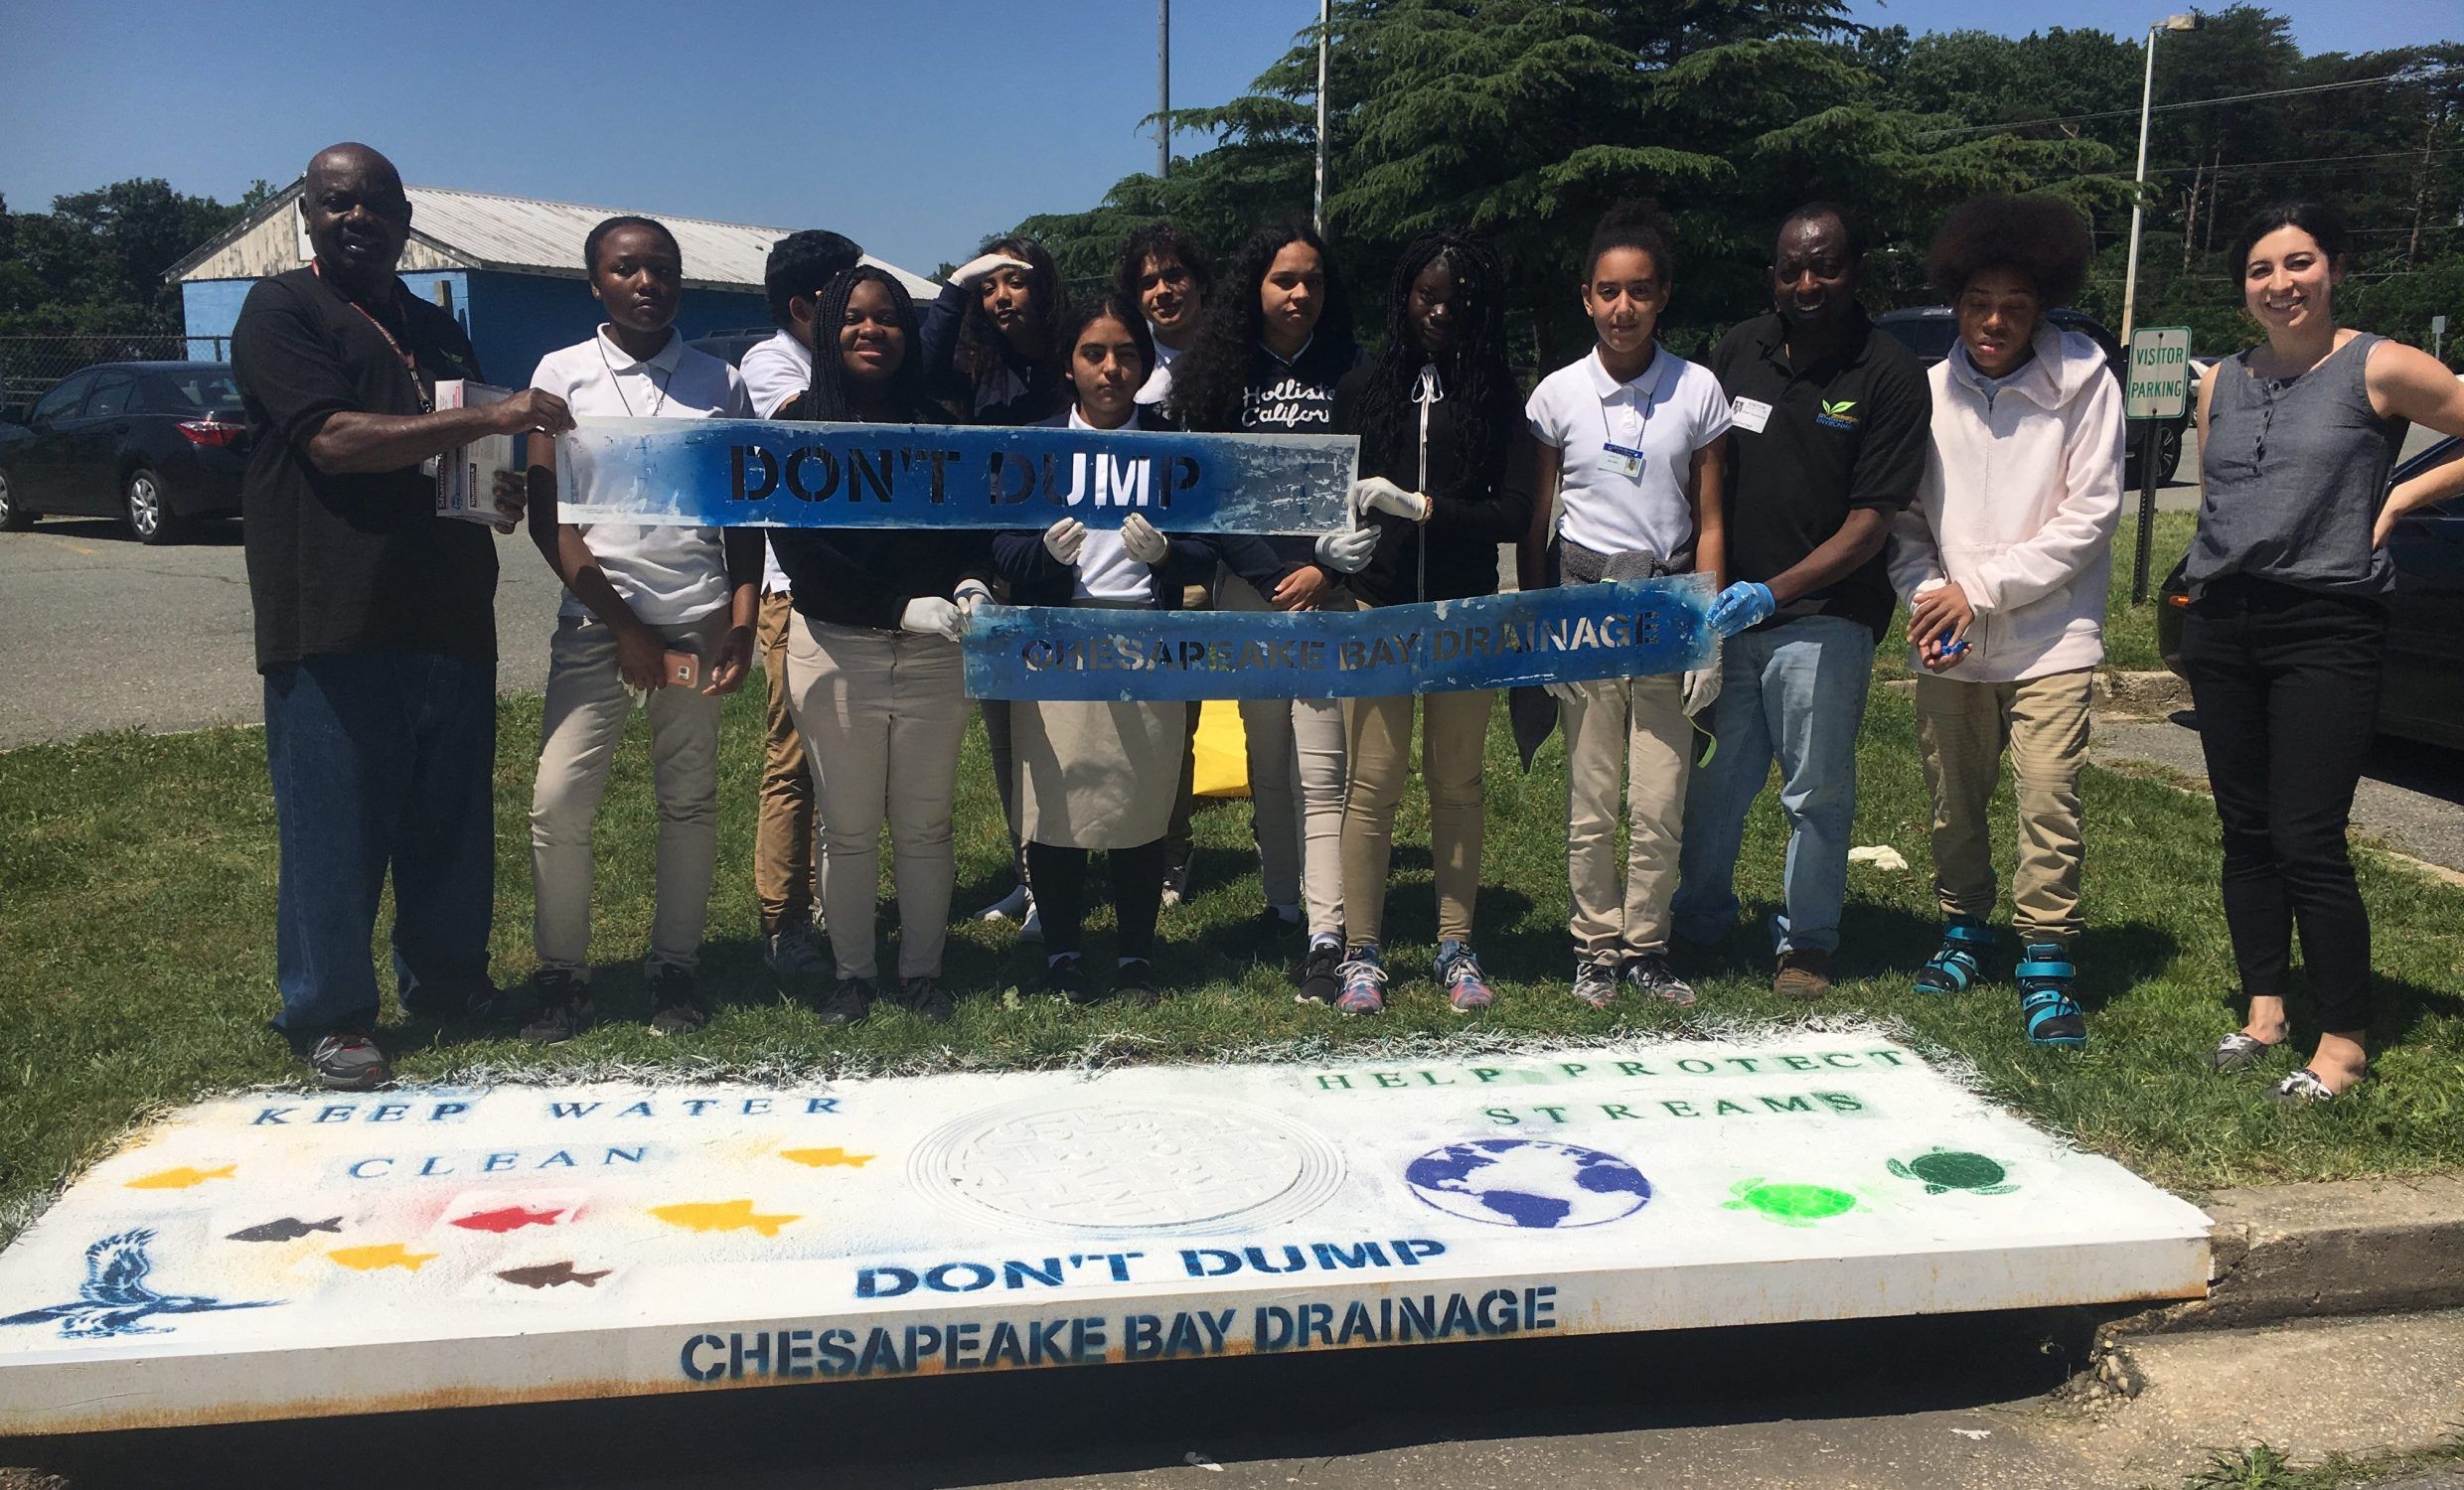 Several students standing behind a freshly painted stormwater drain. They are holding stencils that say "Don't Dump" and "Chesapeake Bay Drainage".